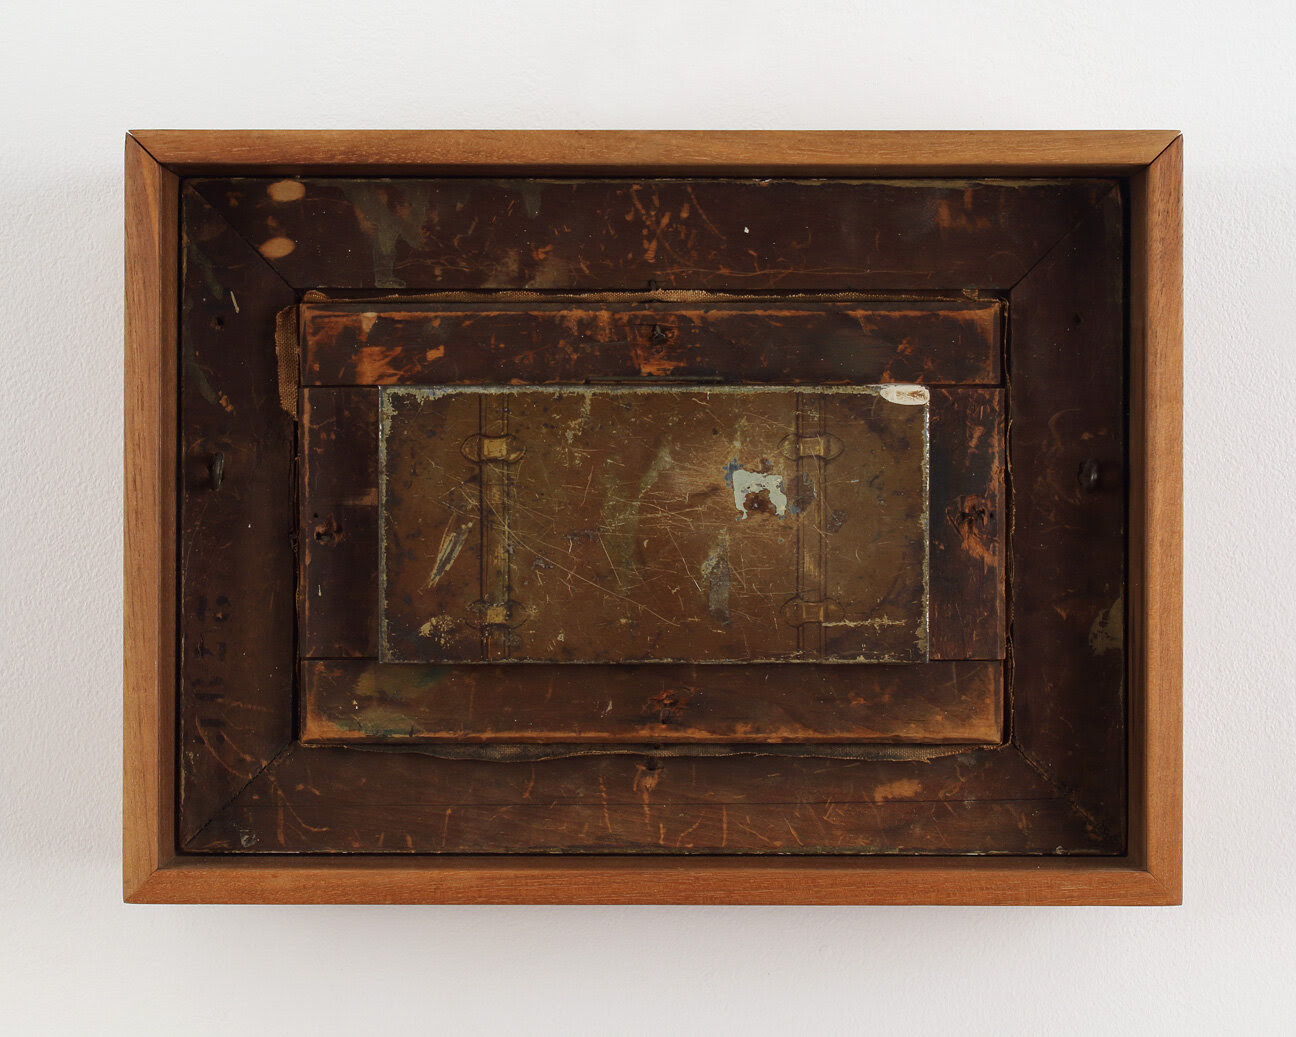 Duchamp's Valise, 1990, mixed media construction, 11 1/4 x 15 1/4 x 4 1/2 inches